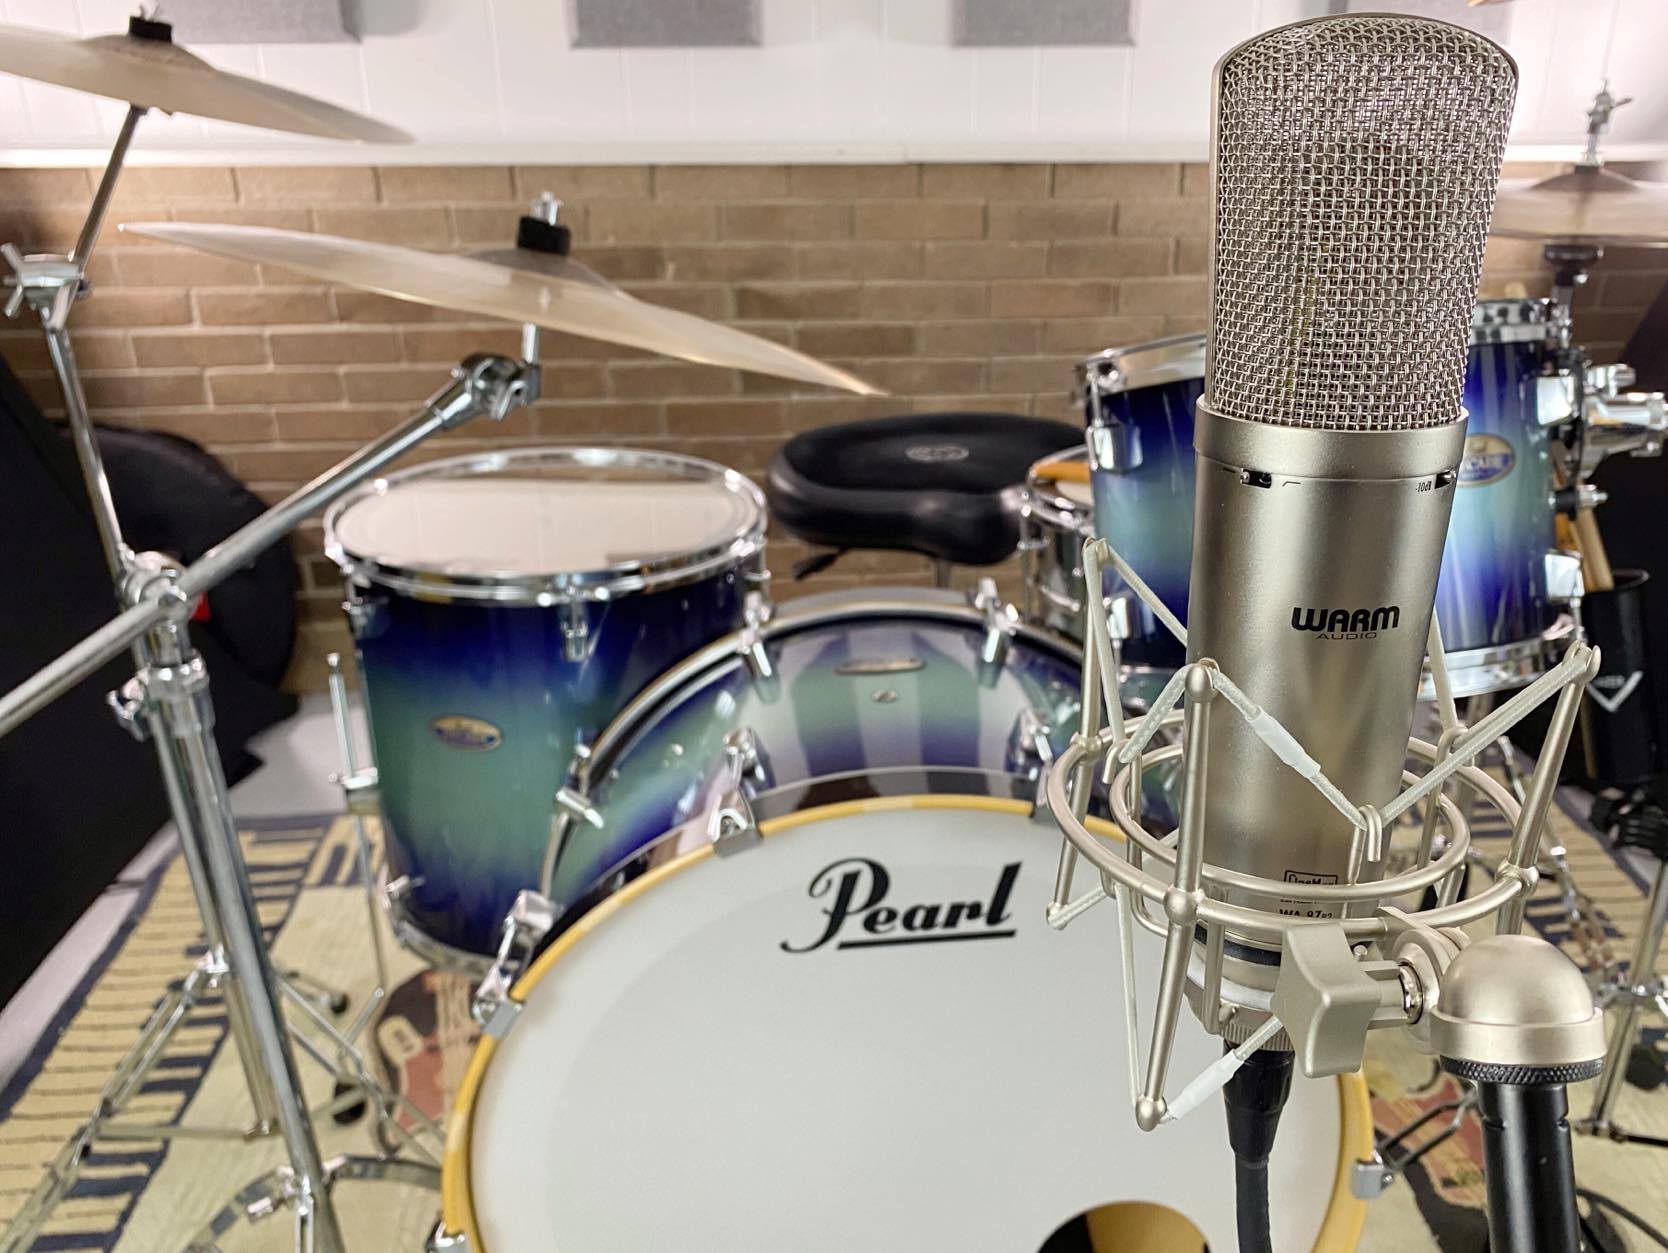 How To Record Drums With 1 Mic